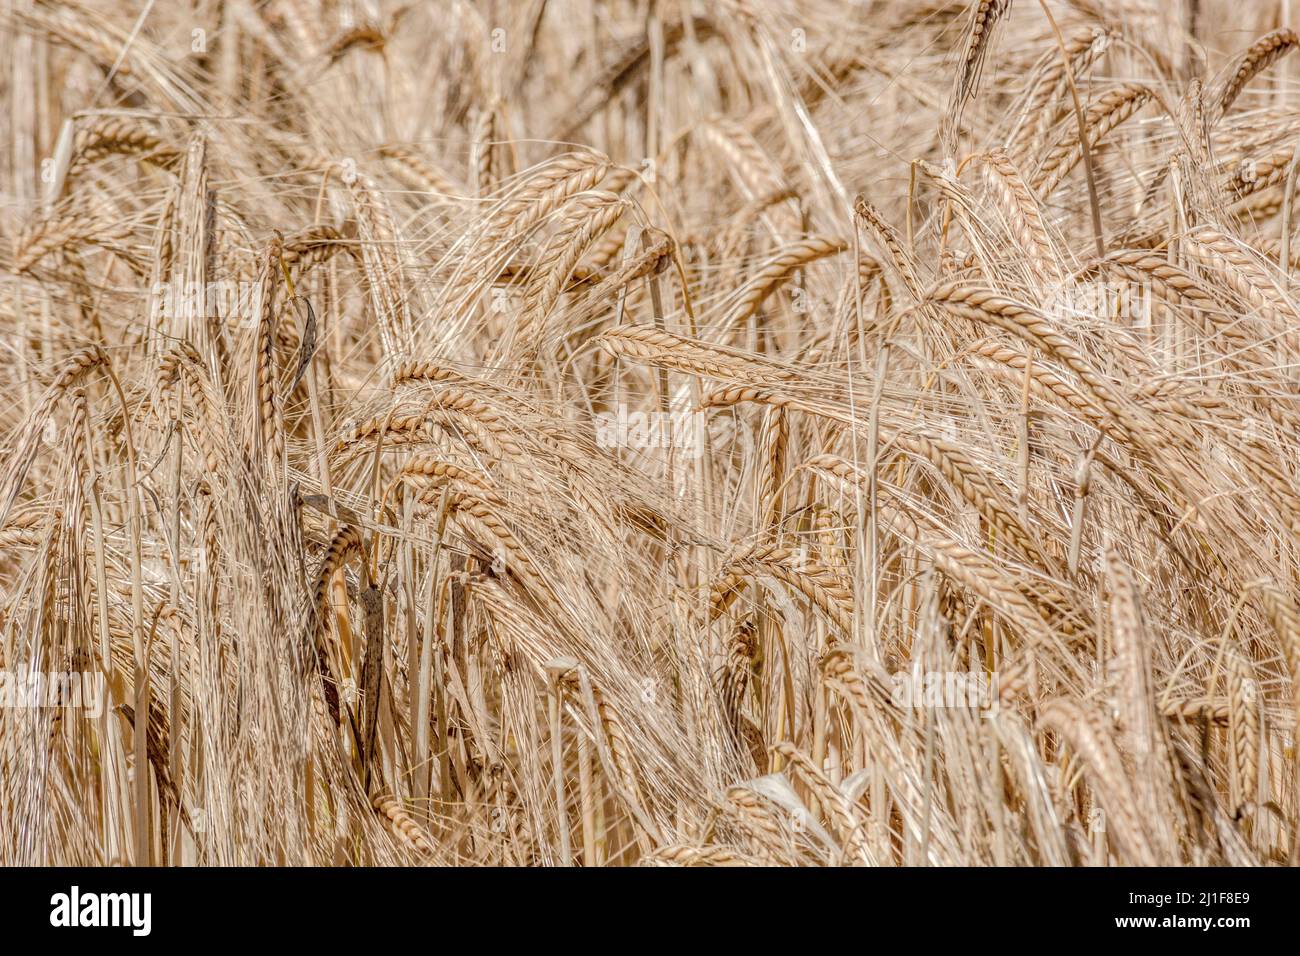 Ears of ripening barley / Hordeum vulgare in cereal cropped field. Metaphor for concept of famine, food security, food growing, food supply UK. Stock Photo